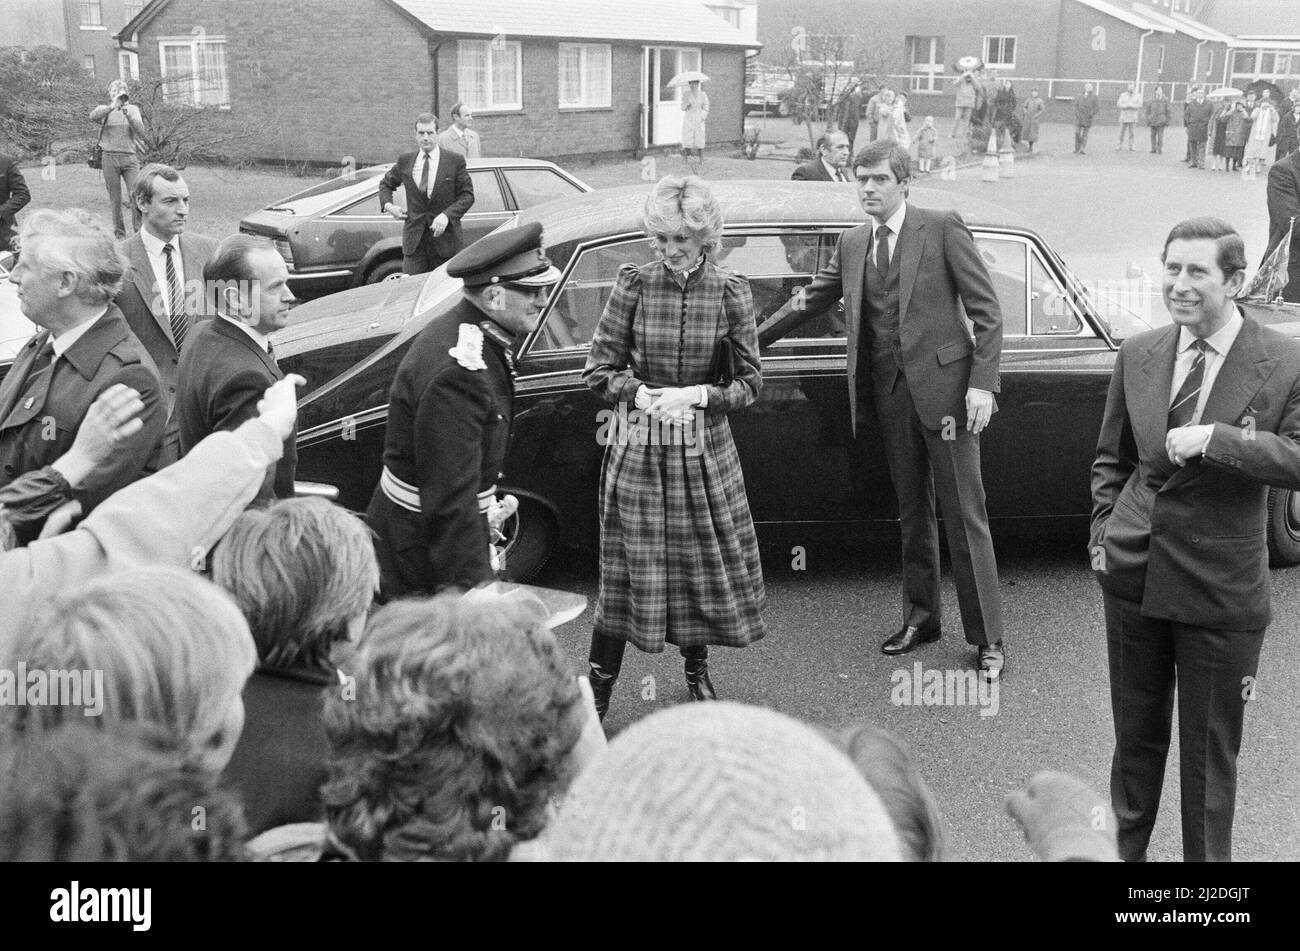 The Prince and Princess of Wales visit Mid Glamorgan in Wales.On this visit, they meet the local well-wishers outside a newly electronics plant.  Picture shows LEFT, STANDING BY THE THE BONNET OF THE CAR Princess Diana's  bodyguard Barry Mannakee wearing a diagonal striped tie and slight pin striped jacket.  Princess Diana, centre wearing tartan, and far right is Prince Charles.  Picture taken 29th January 1985 Stock Photo